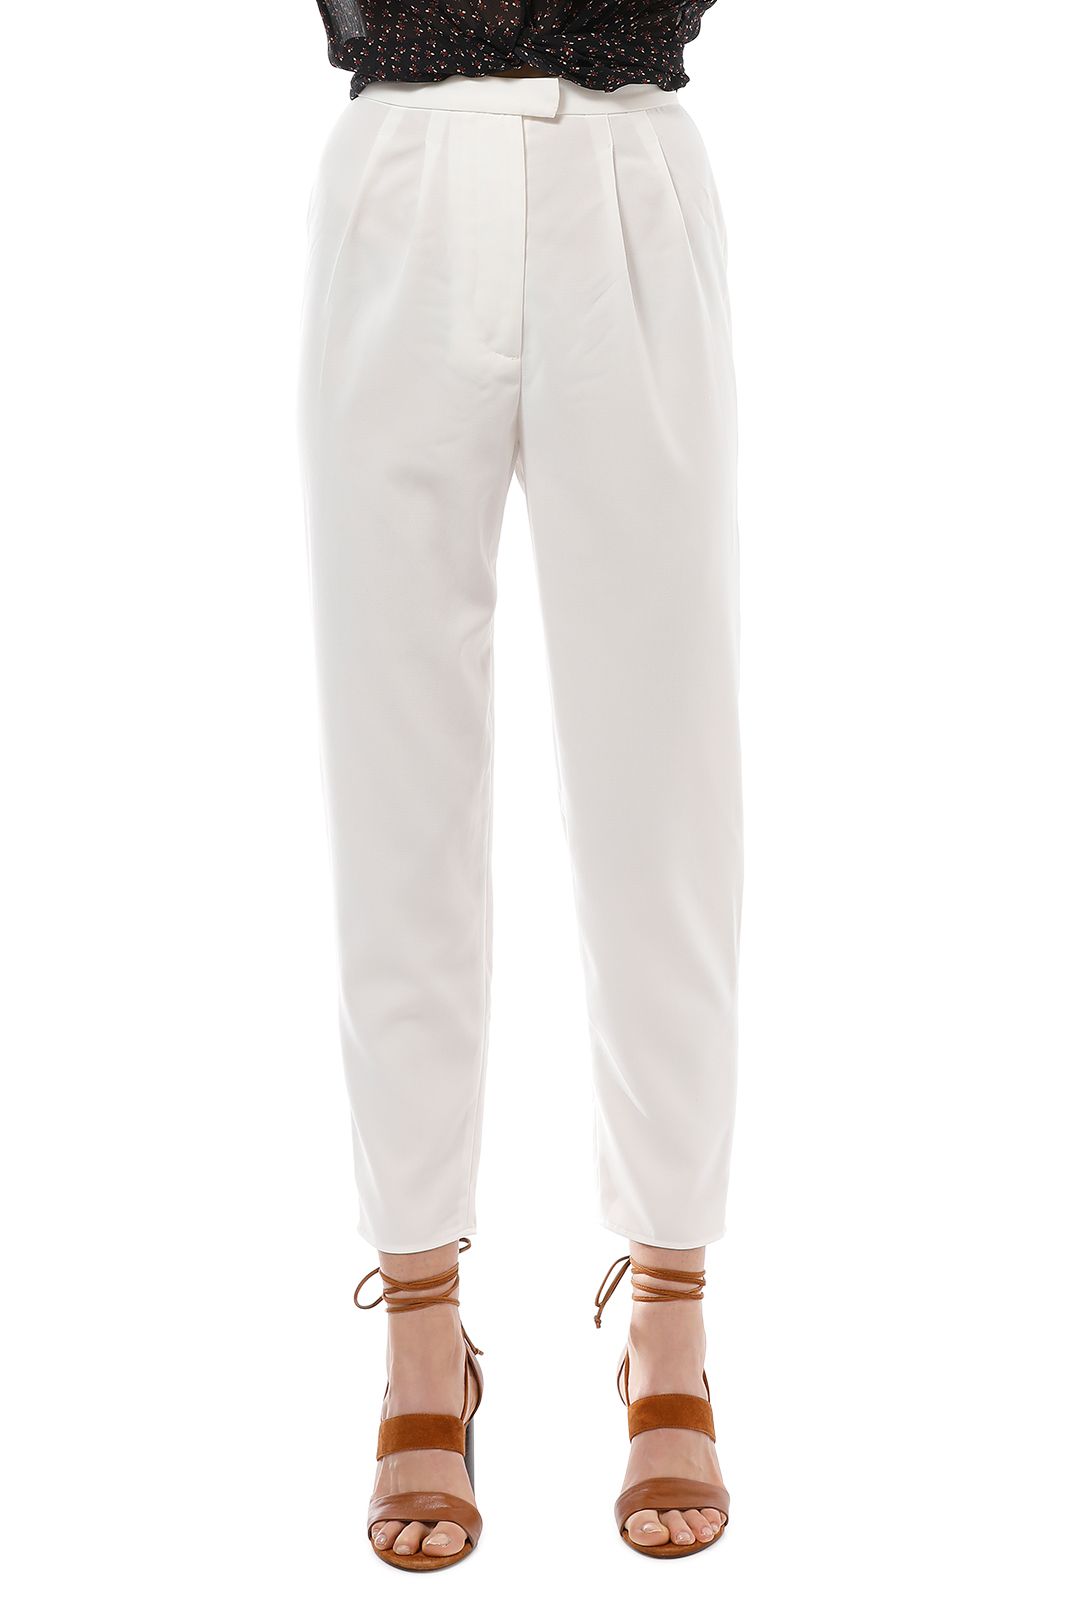 Keepsake the Label - Gone Again Pant - Ivory - Front Crop